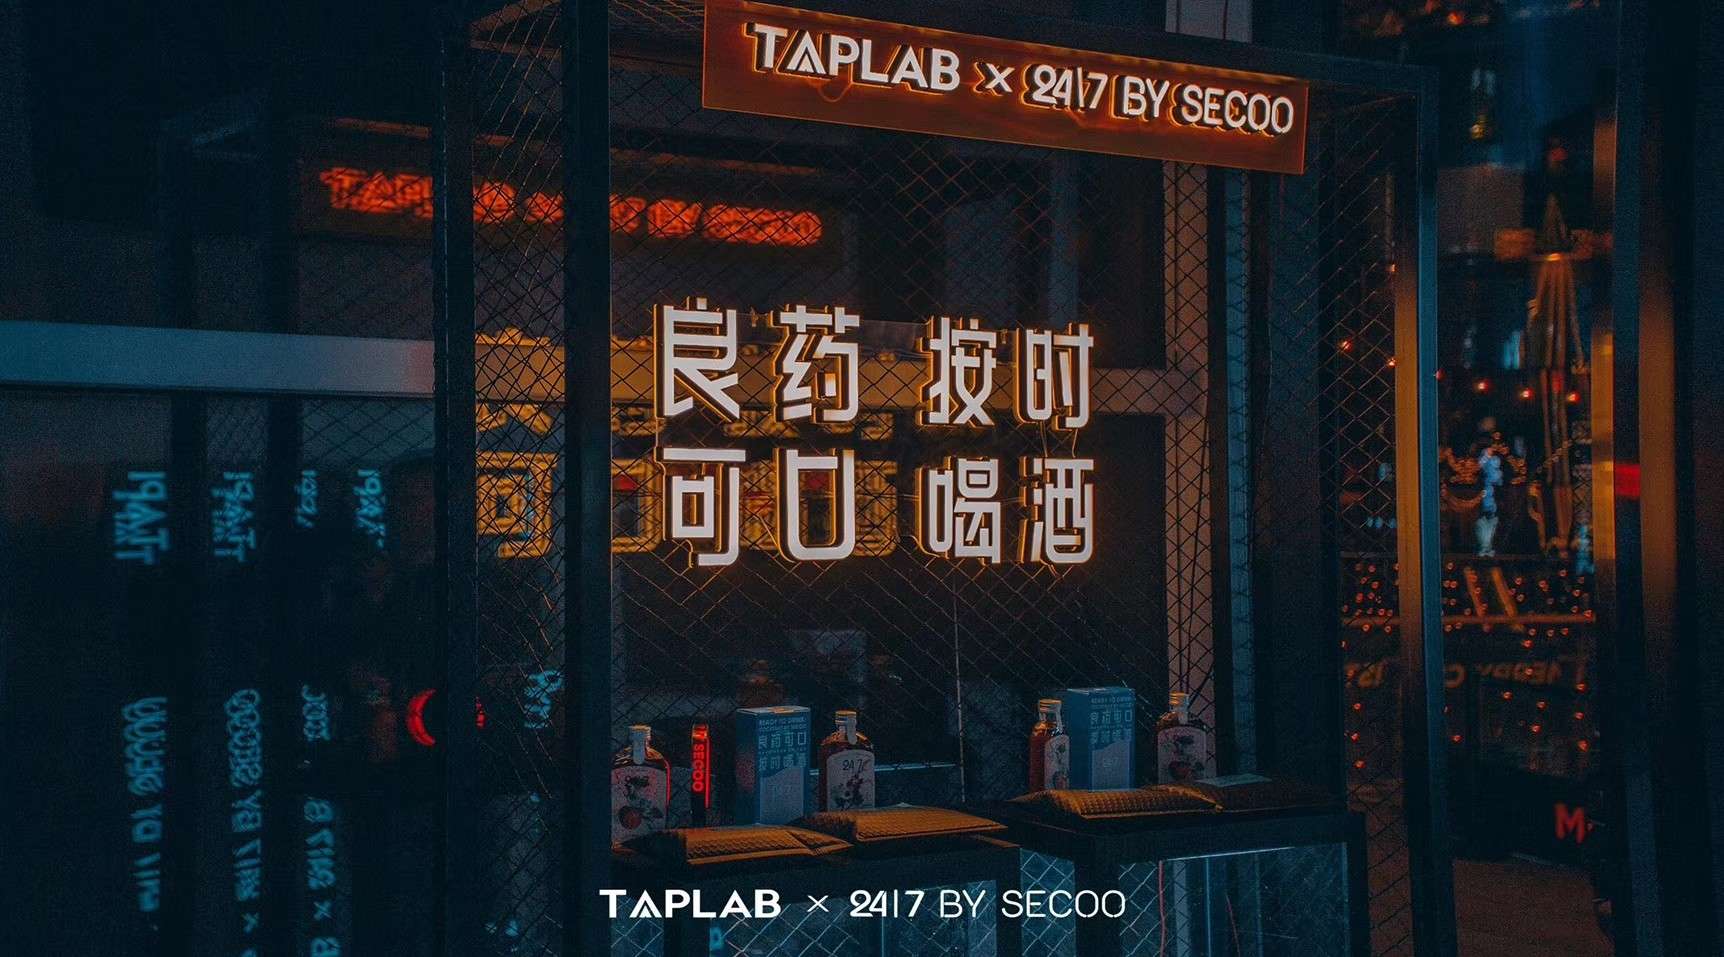 TAPLABX24 BY SECOO